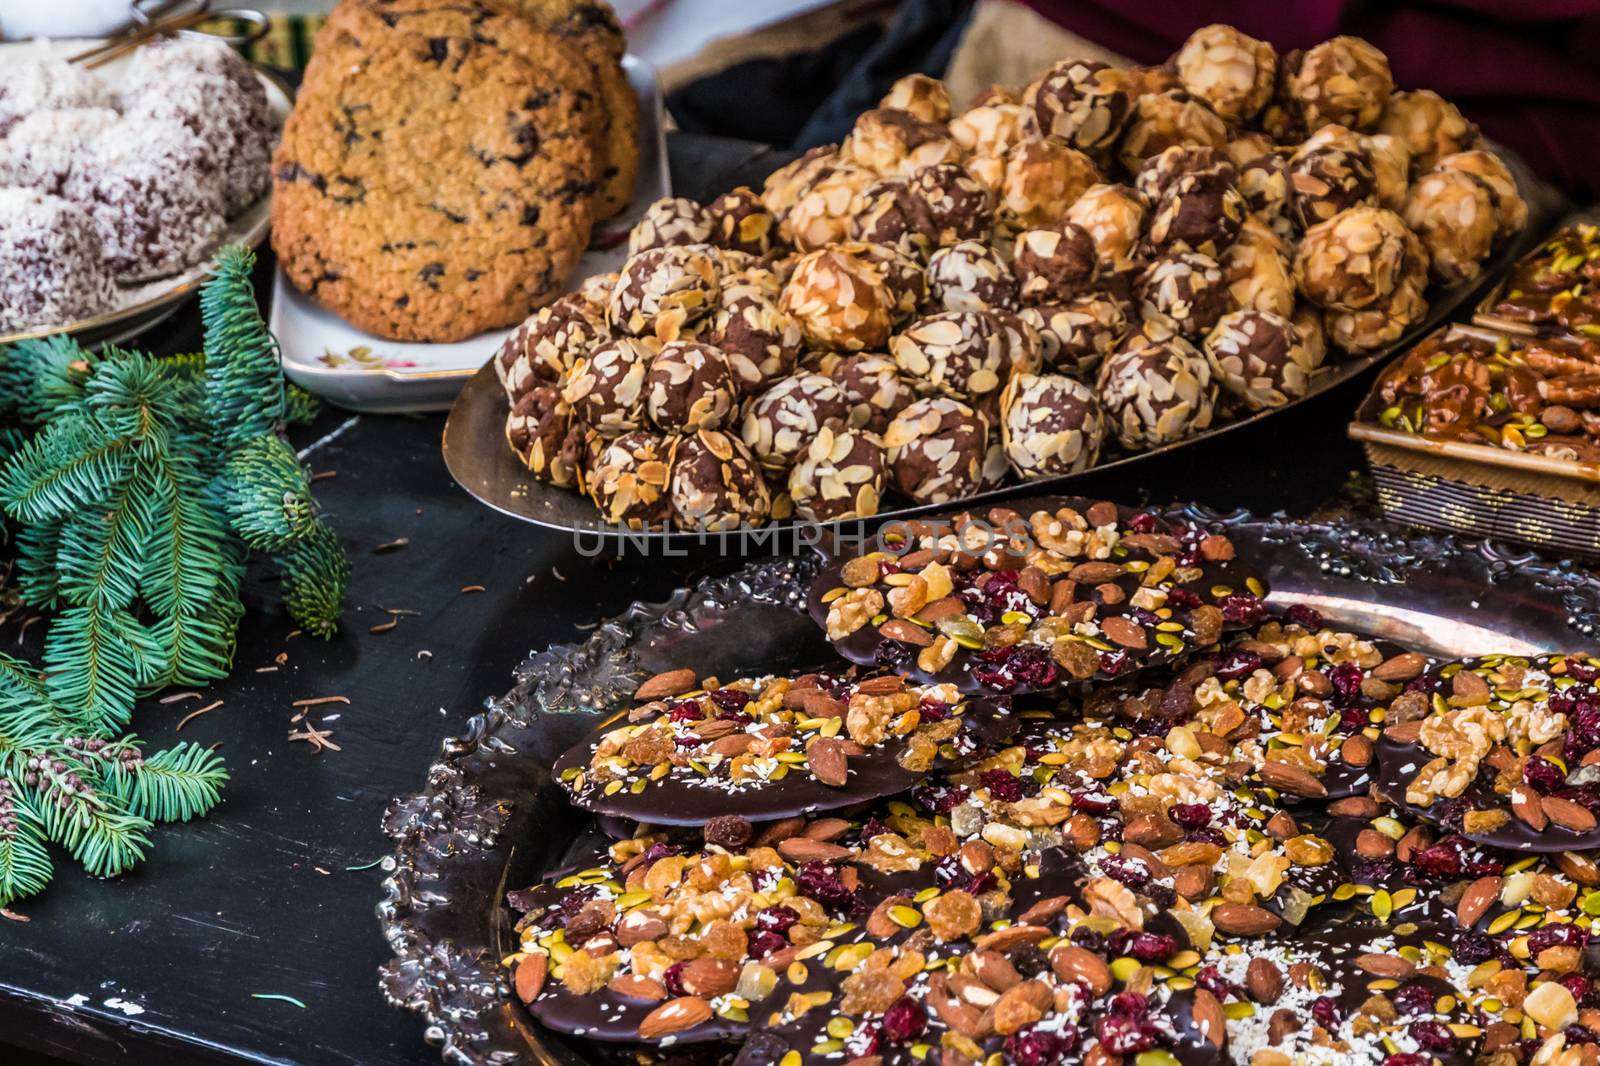 Cookies, pastries, cakes, biscuits at swedish street food market